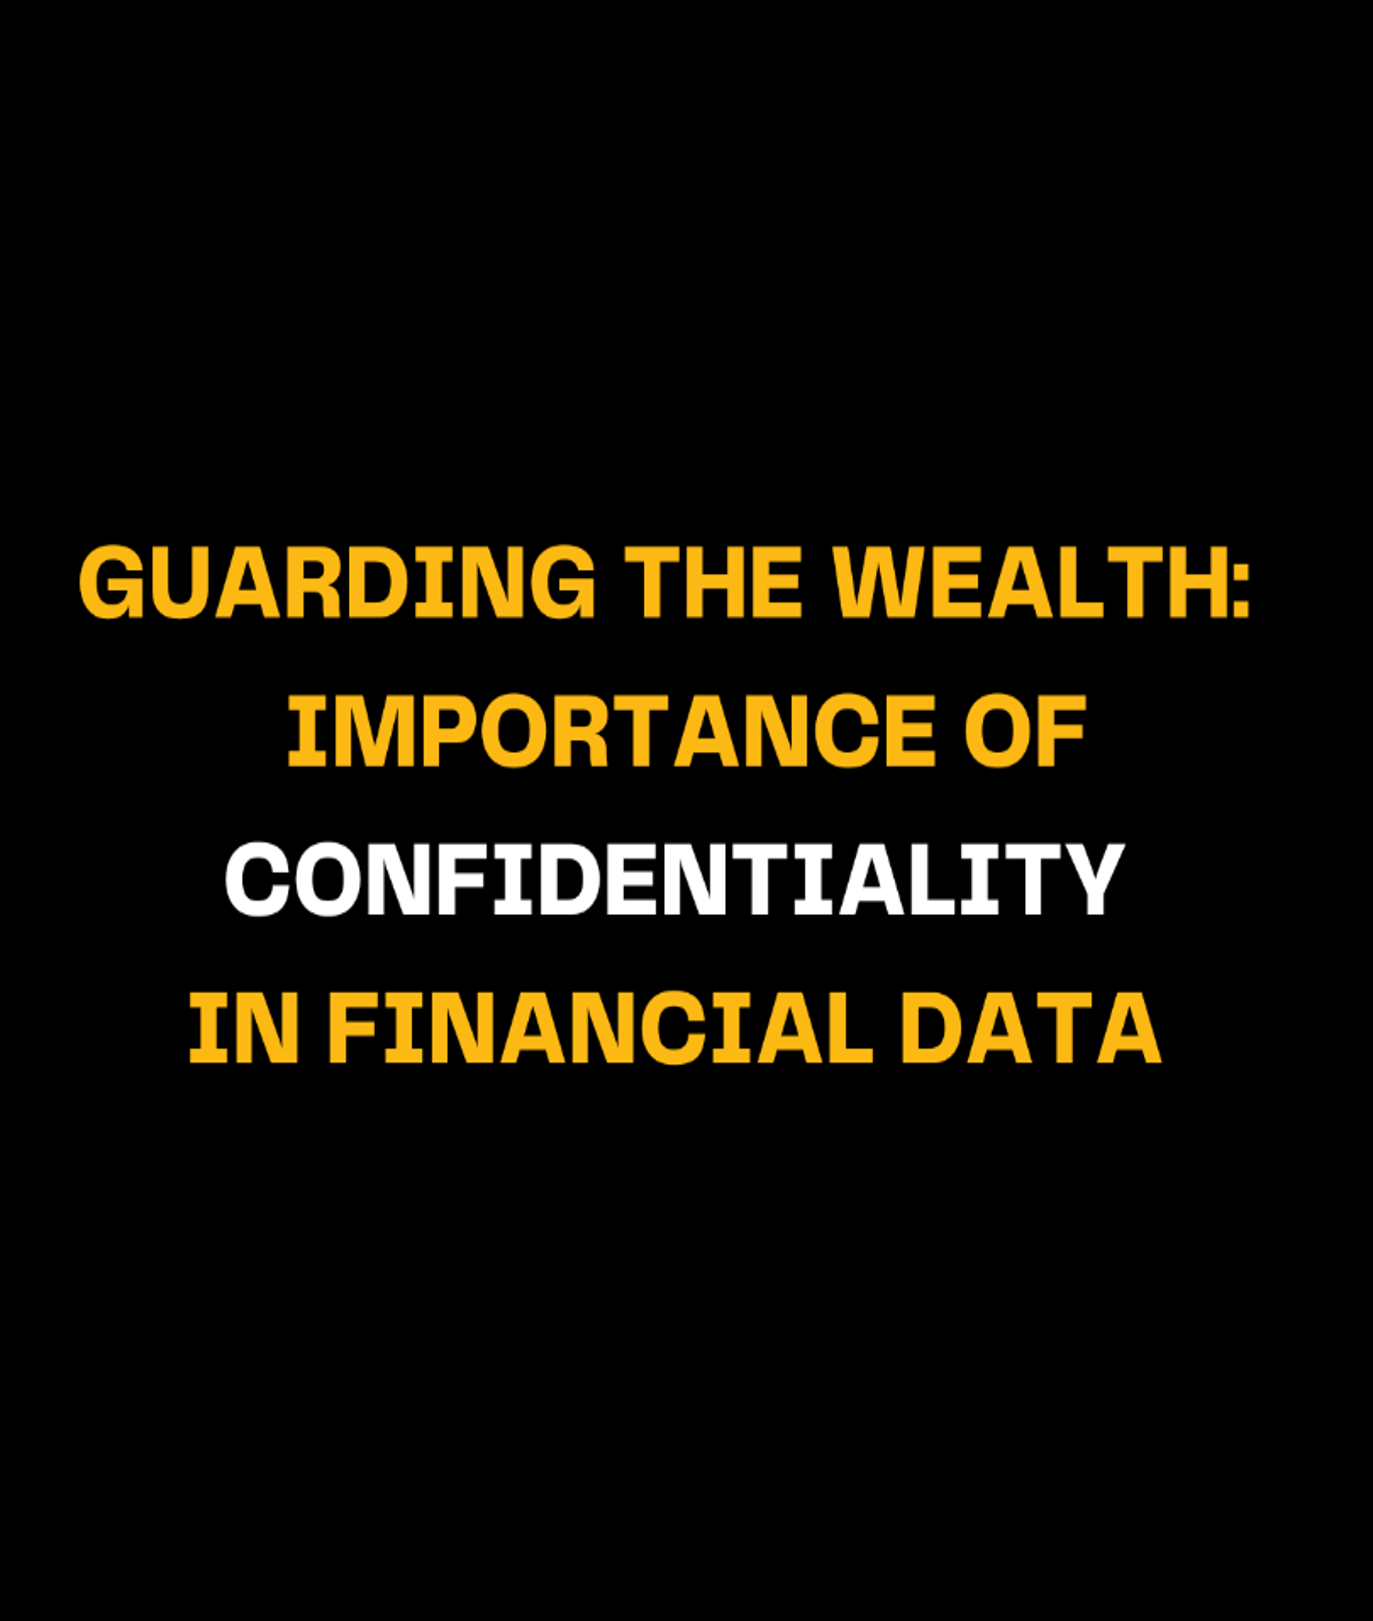 Guarding the Wealth: The Importance of Confidentiality in Financial Data